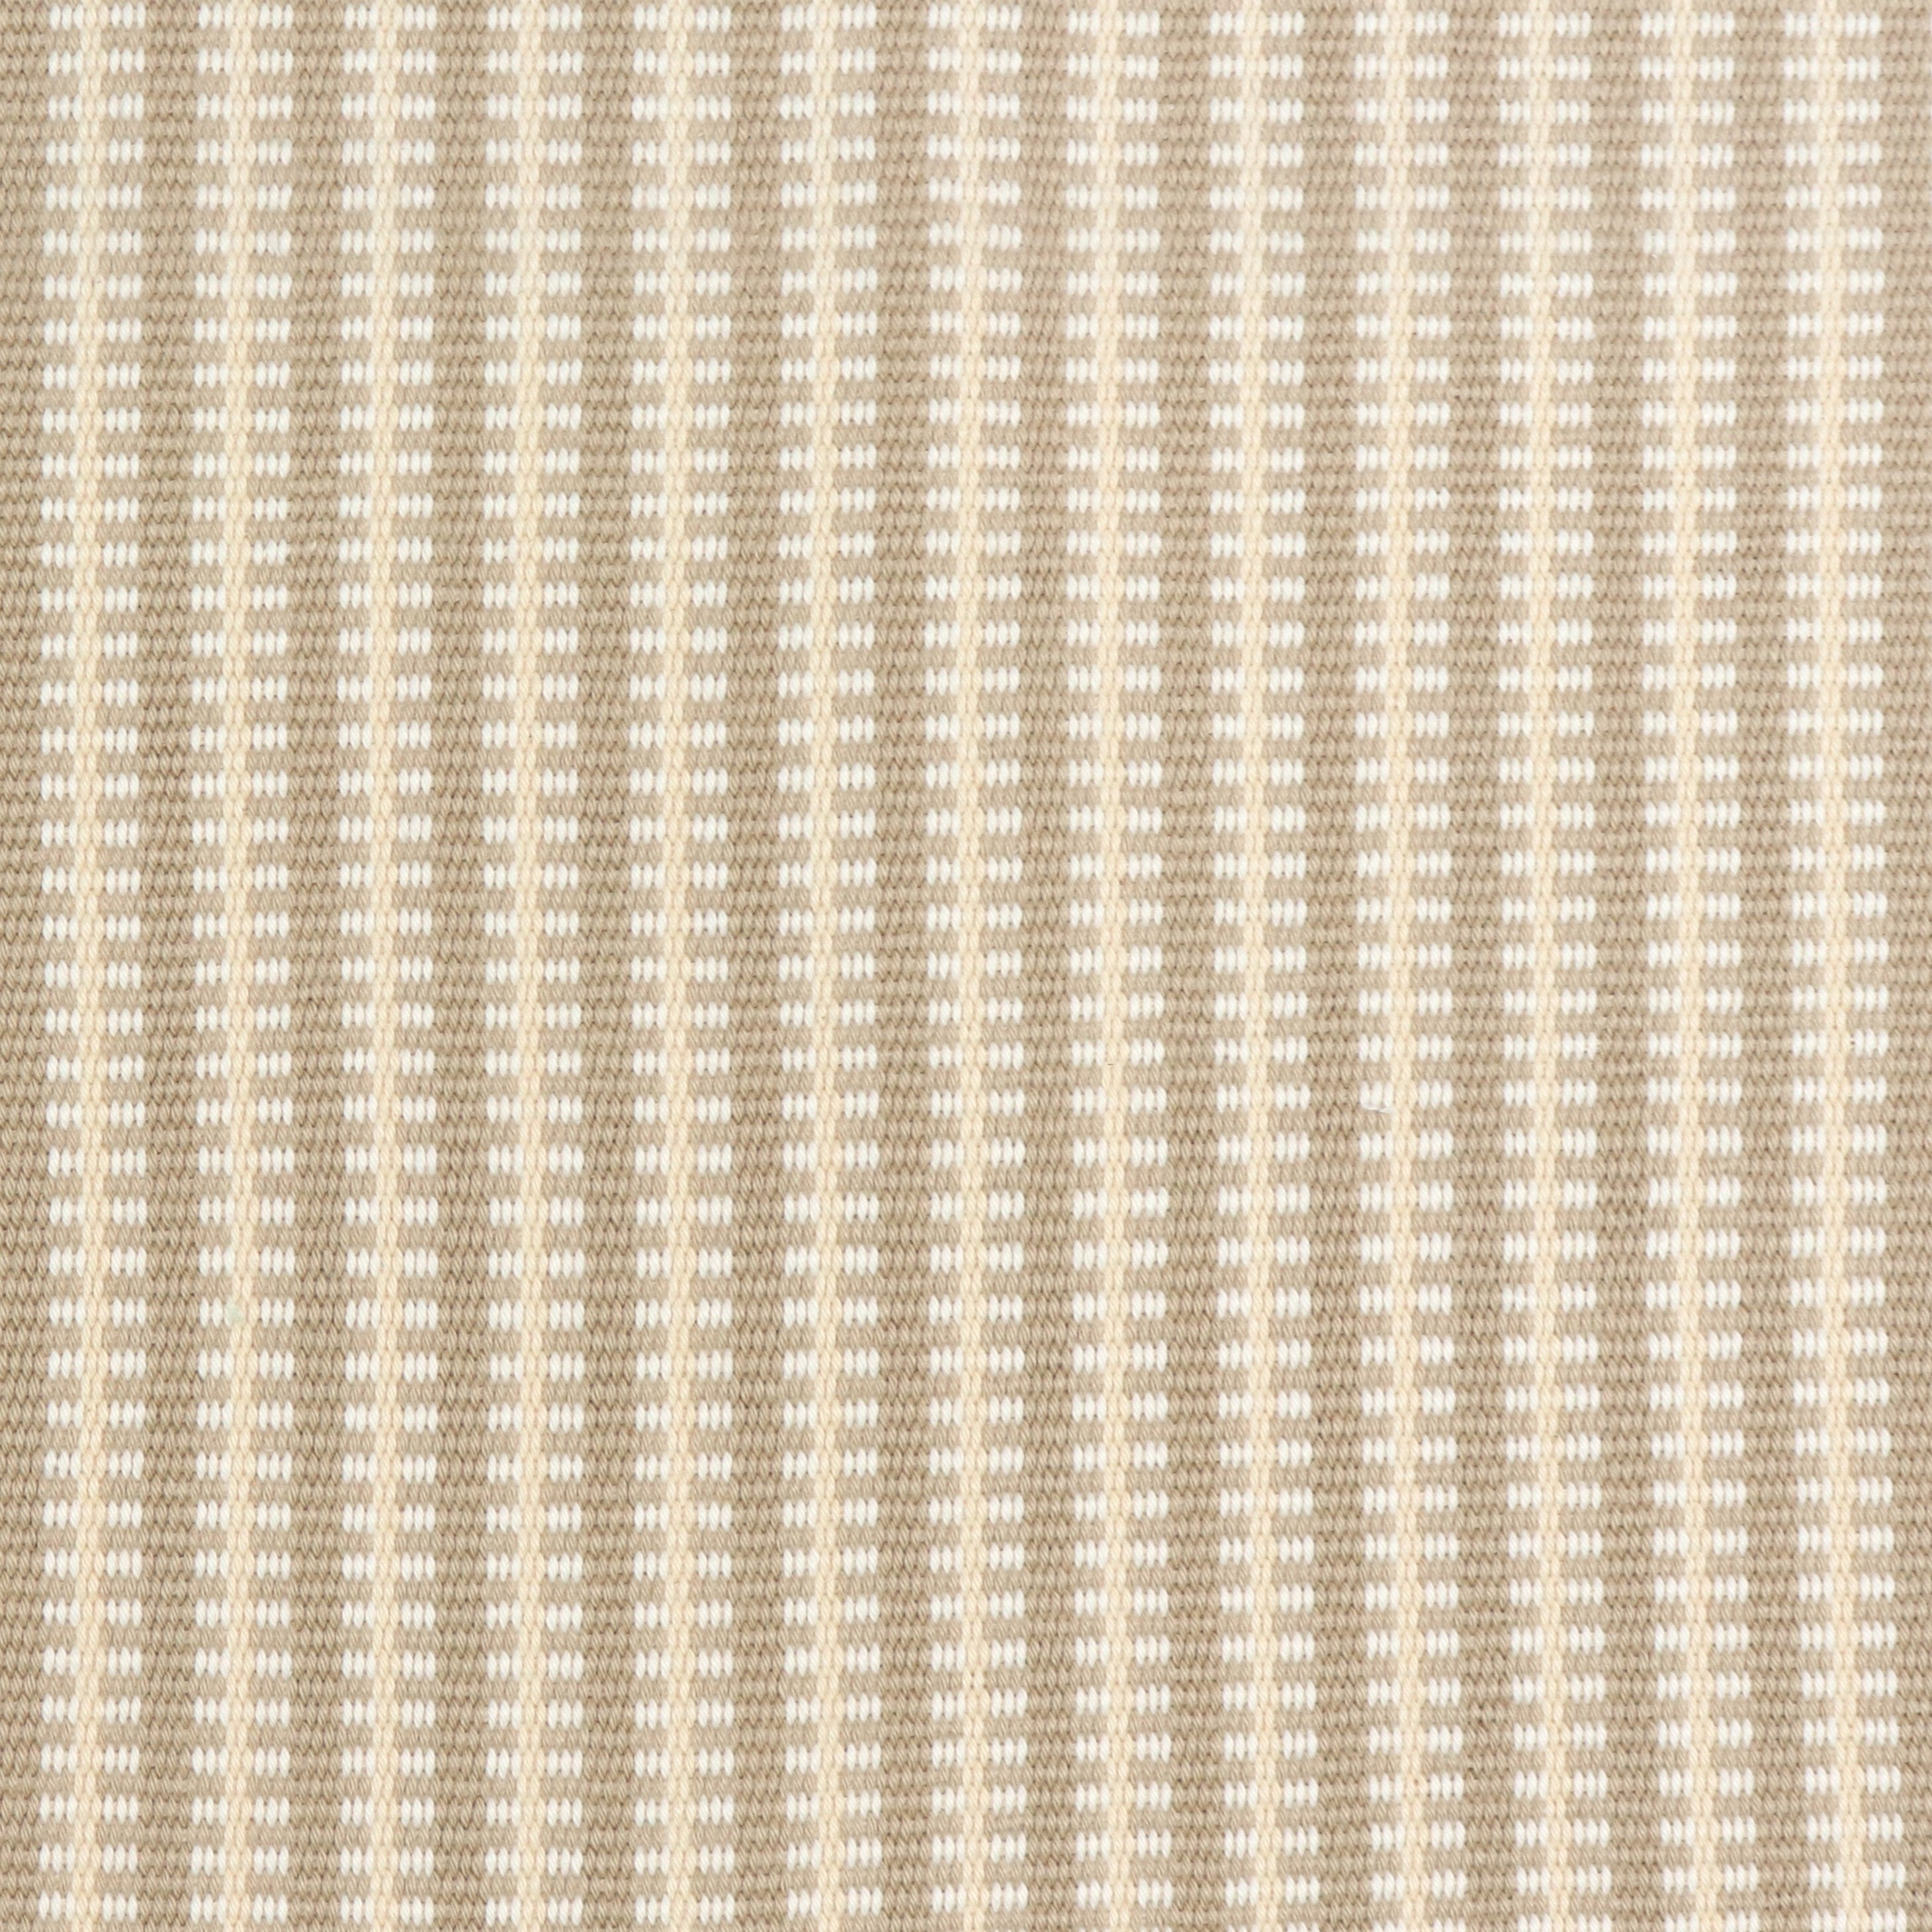 Detail of a hand-woven cotton fabric in an intricate gridded stripe pattern in shades of cream, tan and white.